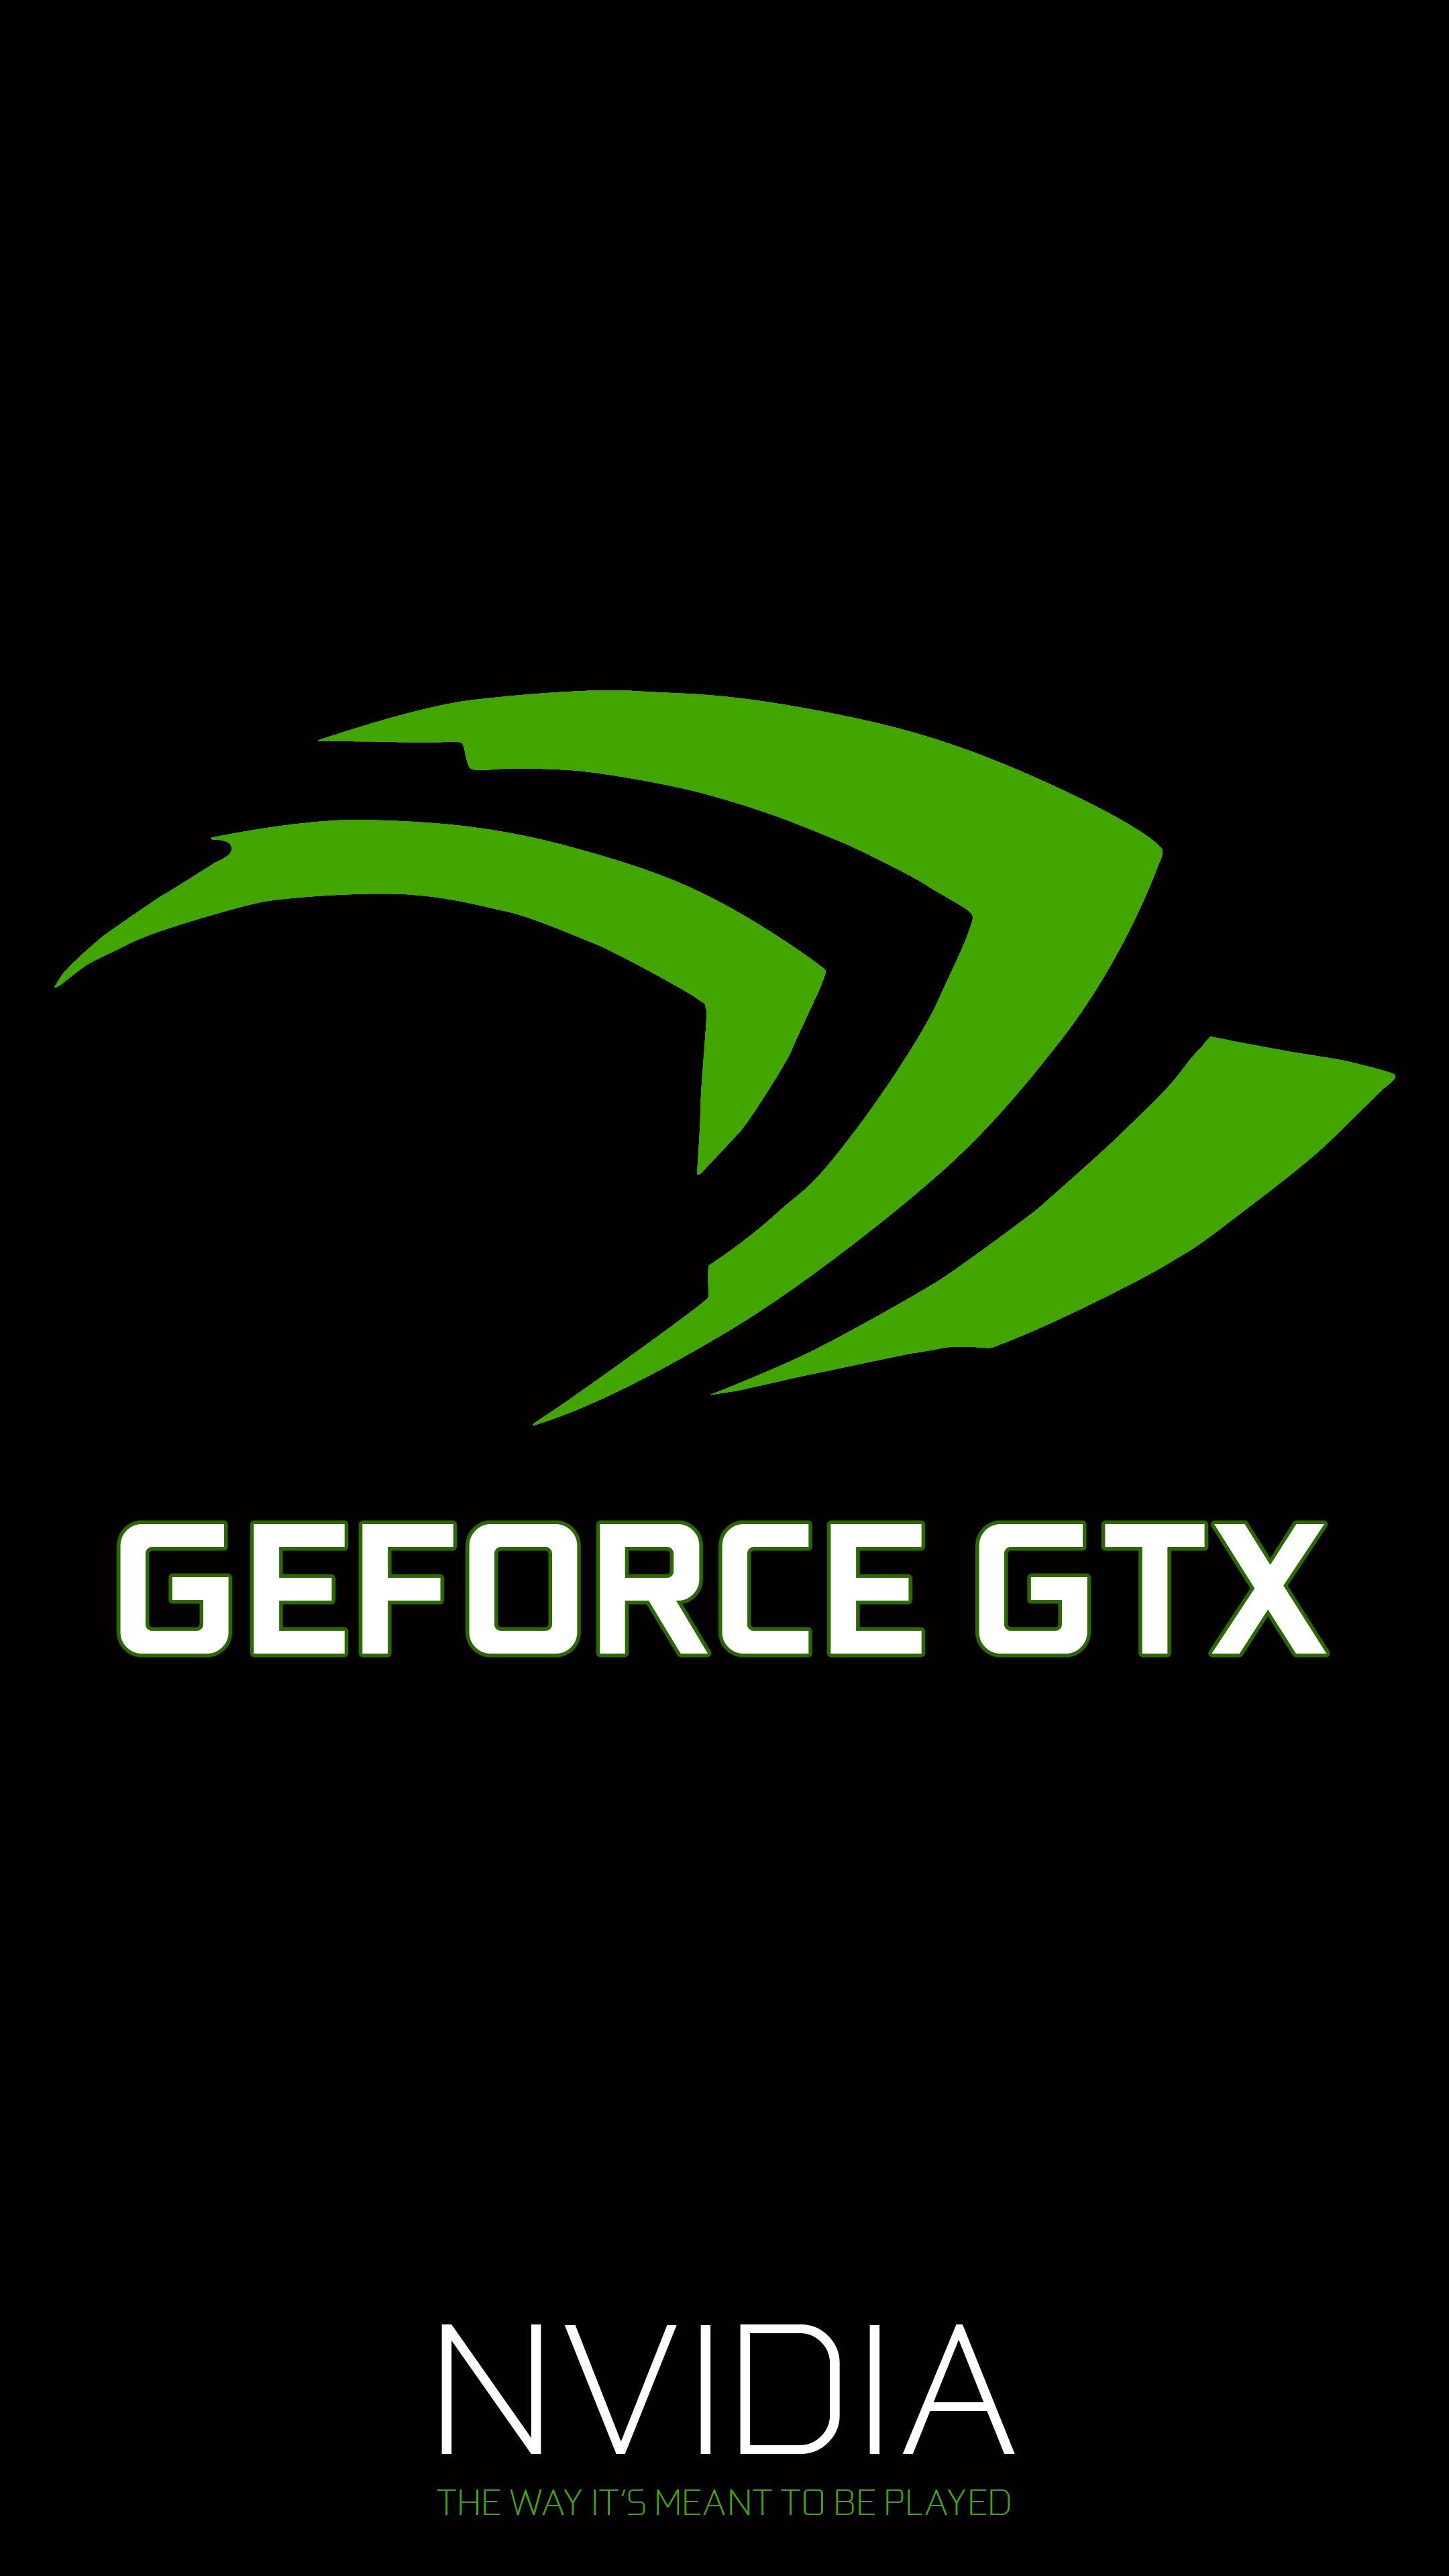 Made a GeForce phone wallpaper if anyone wants it. (2160x3840)